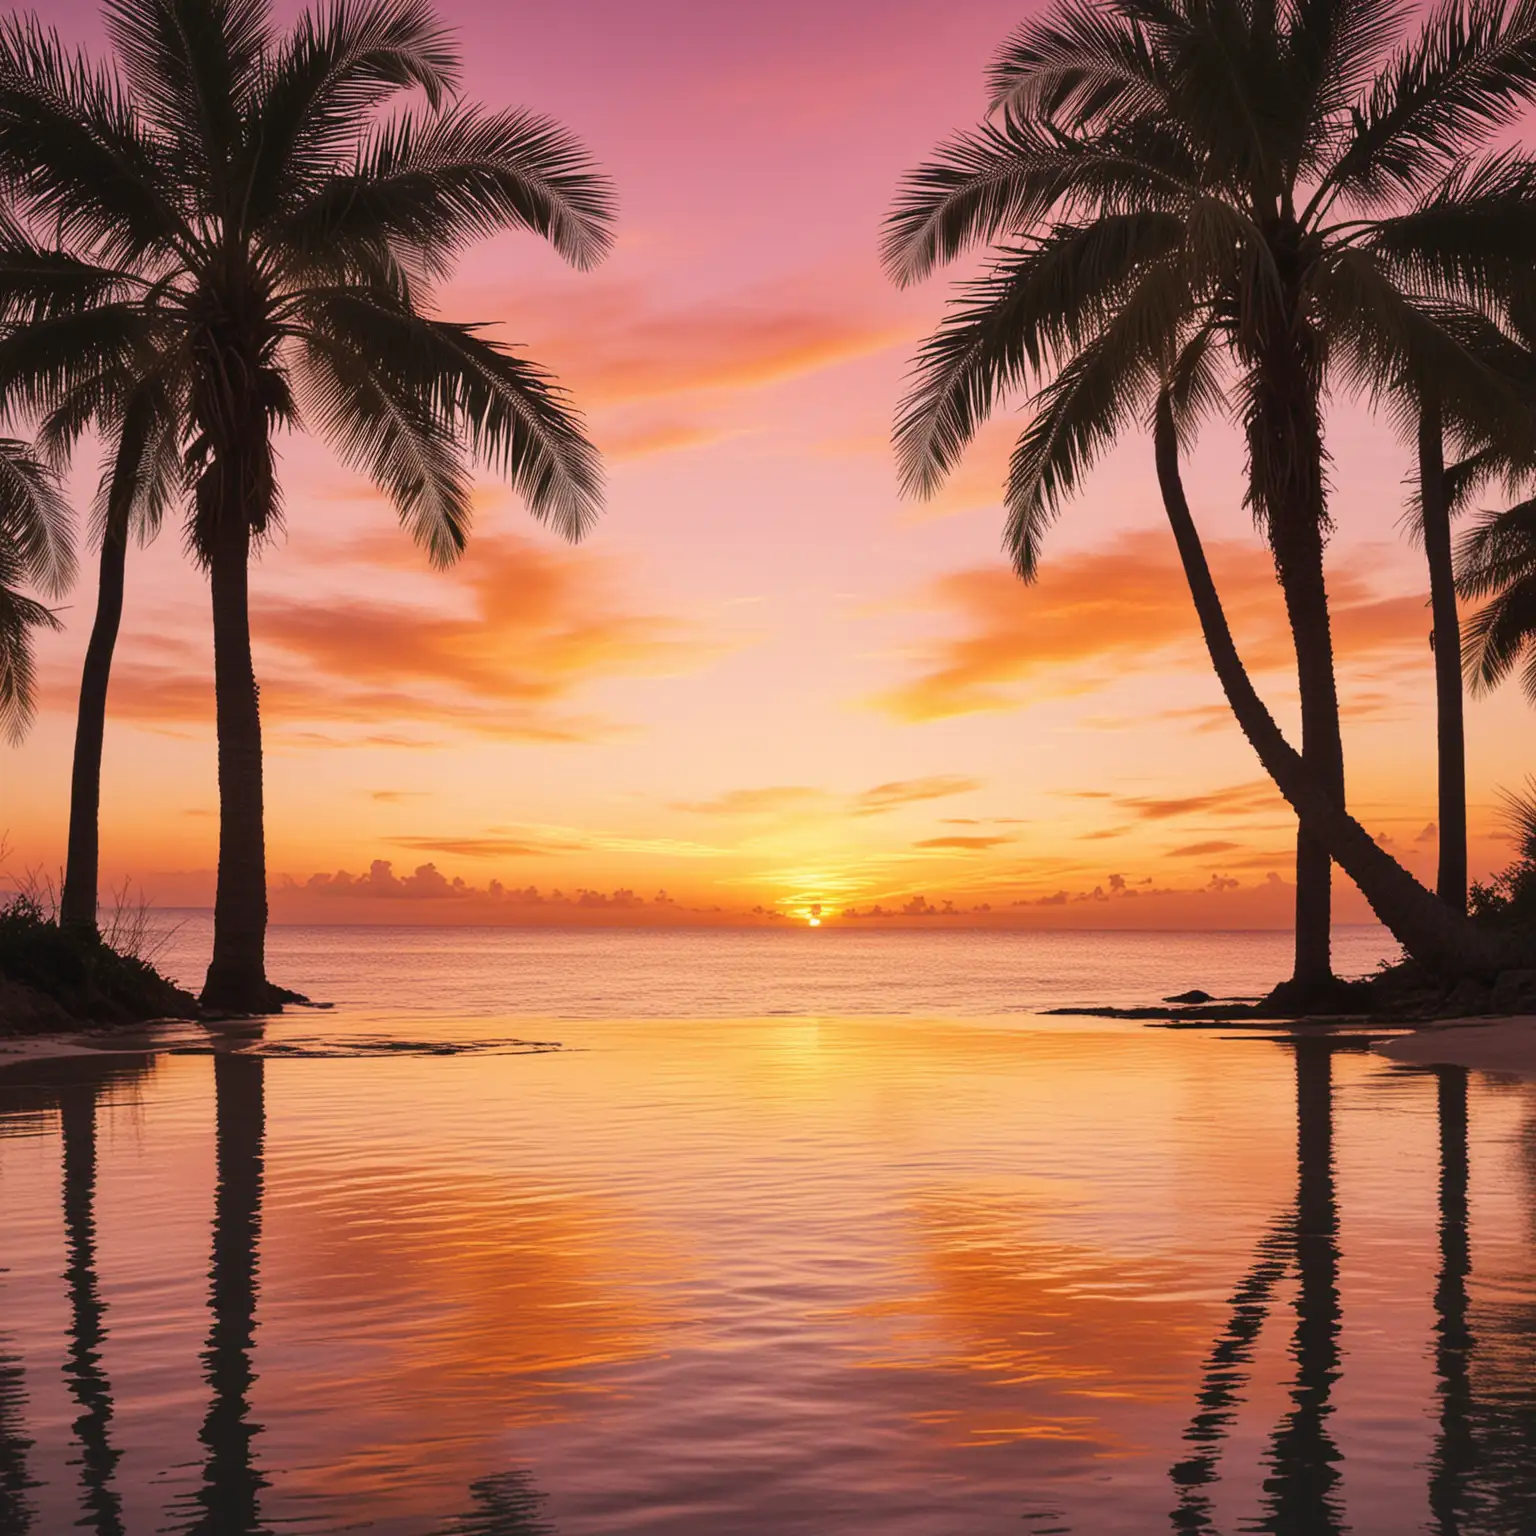 Paradise Sea View with Palms at Sunset